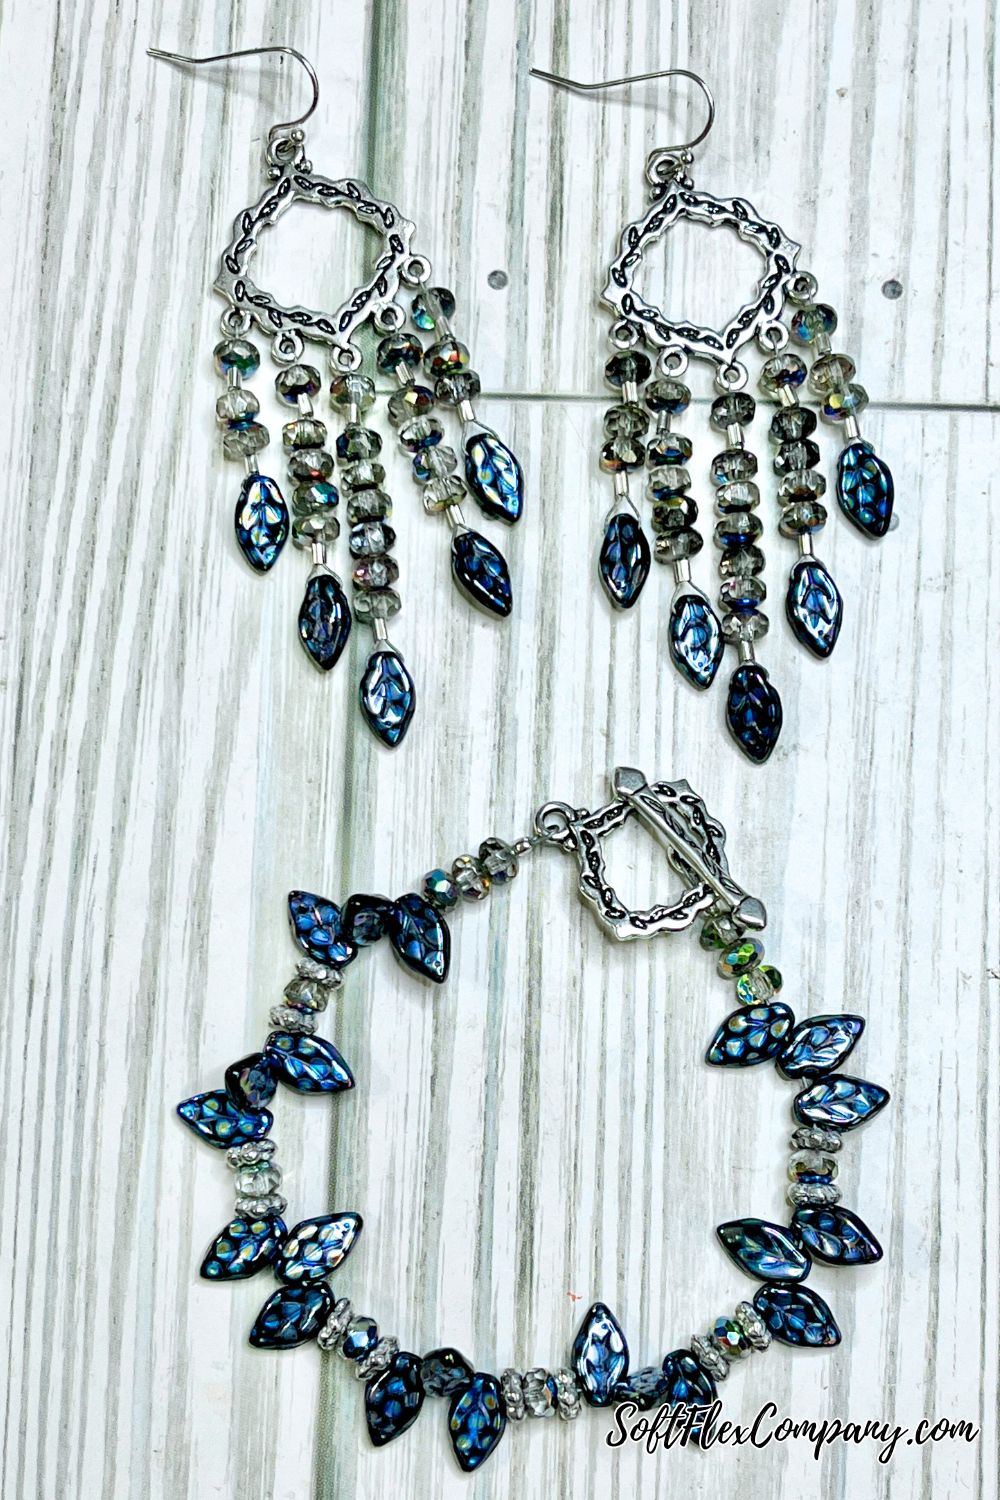 Sparkly Chandelier Earrings and matching Bracelet by Kristen Fagan